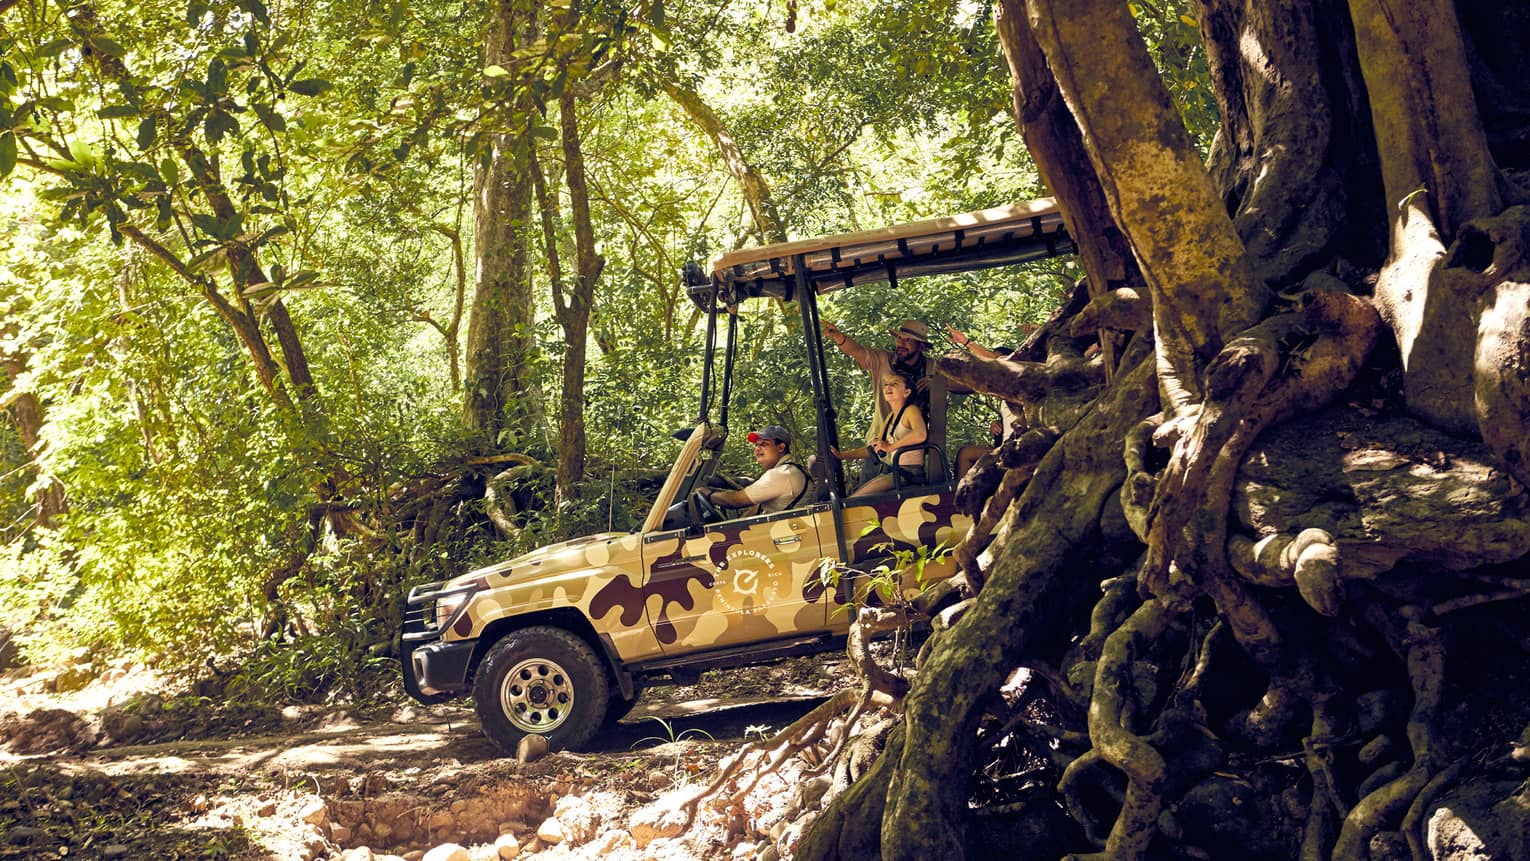 A tour guide and two guests explore the Costa Rican jungle in an open-air Jeep